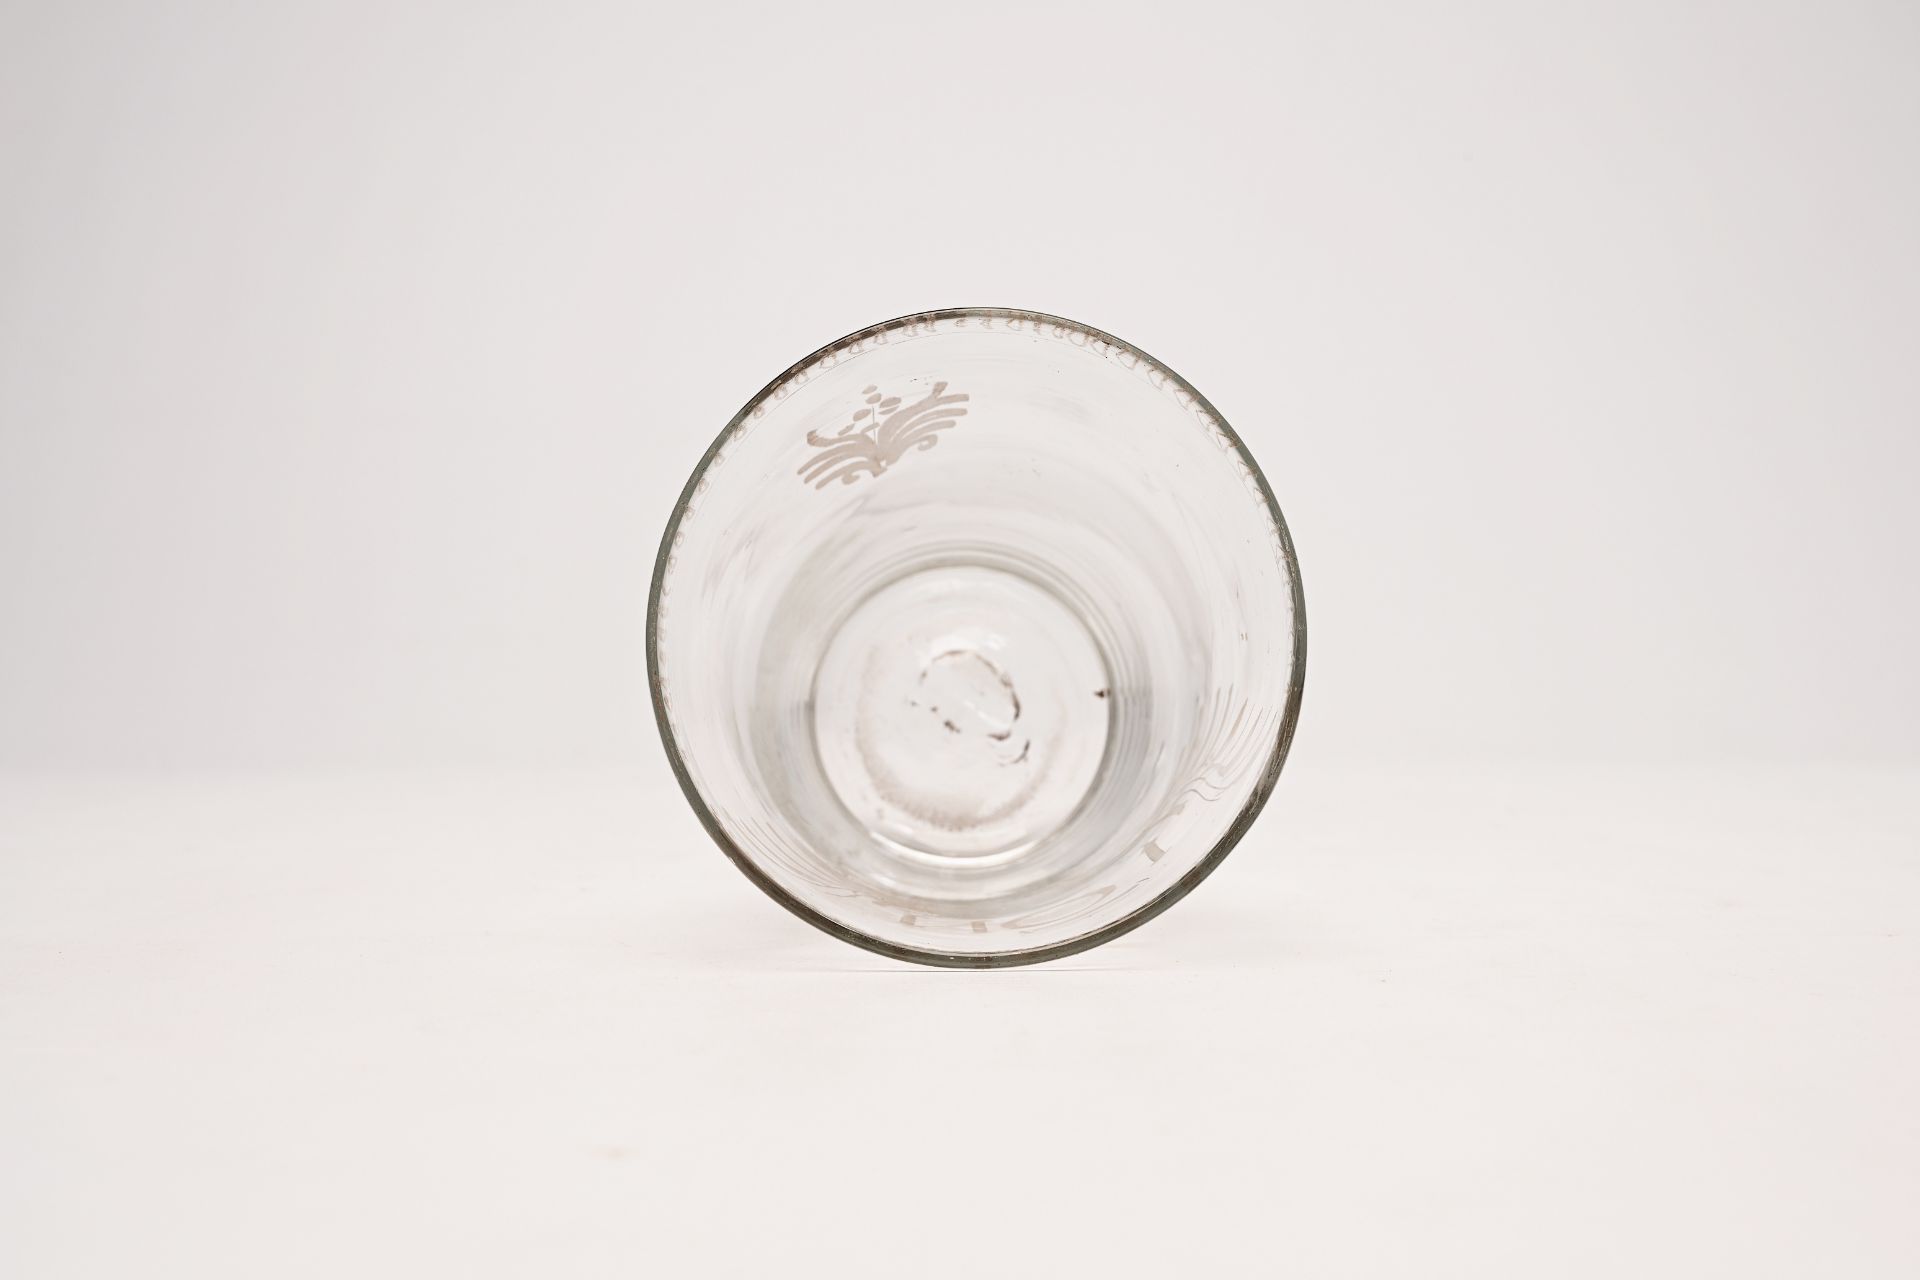 An etched or engraved glass with monogram NOI, end 18th C. - Image 5 of 6